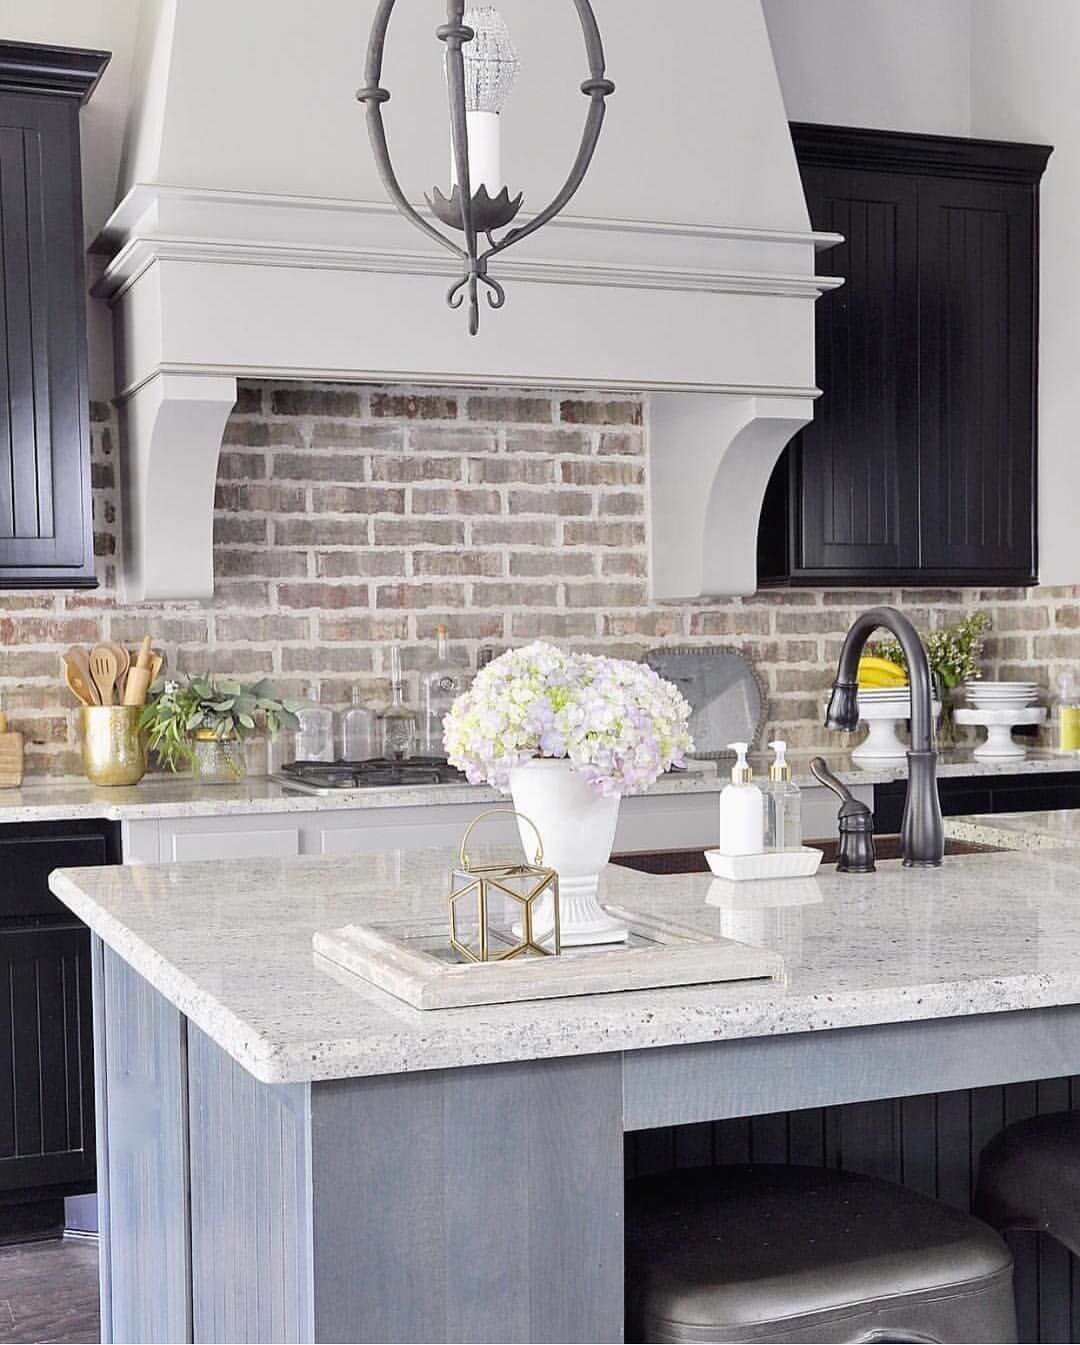 Kitchen island with complete sink